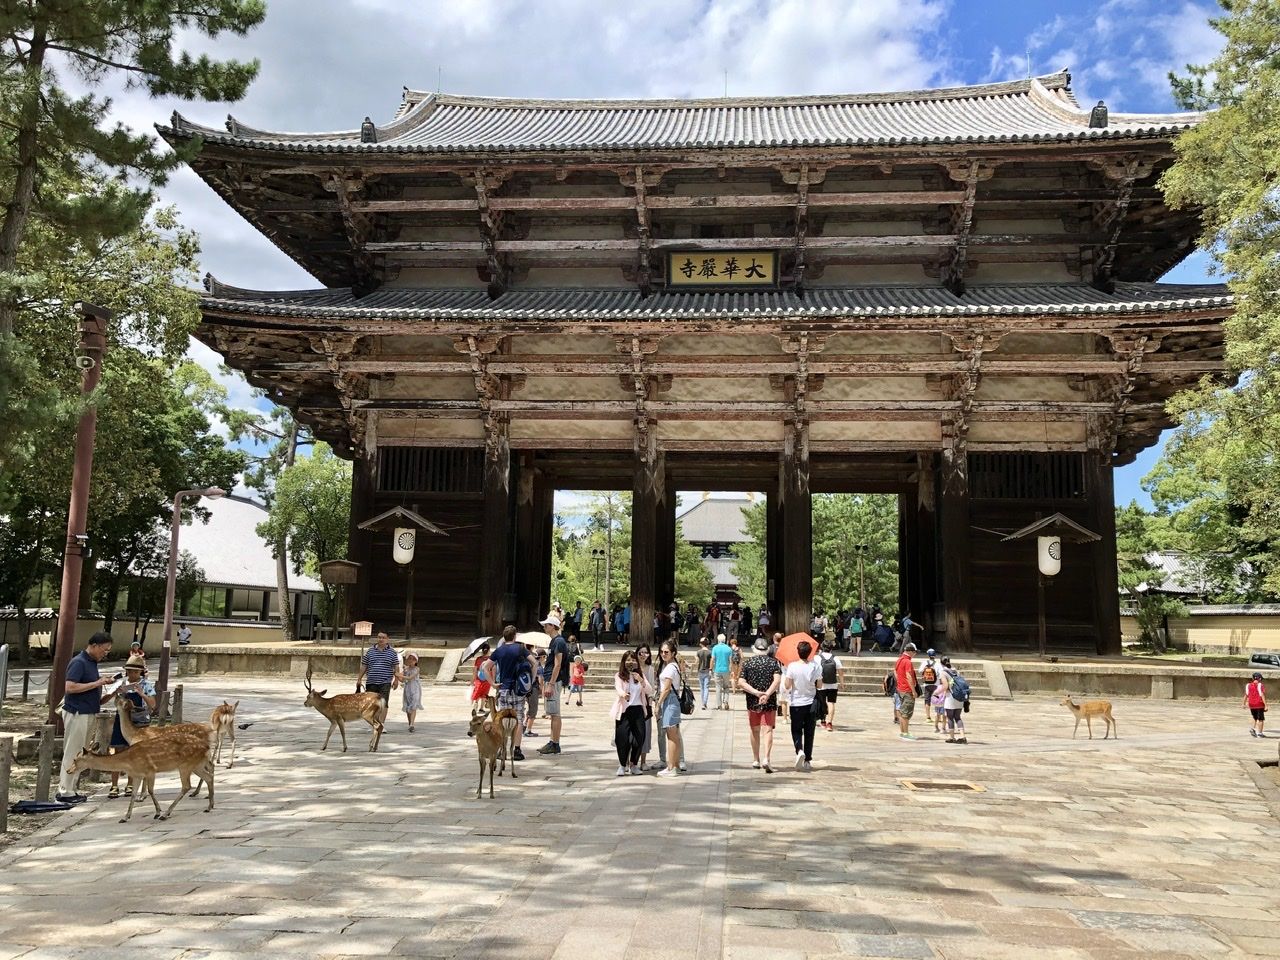 People and deer at a temple gate